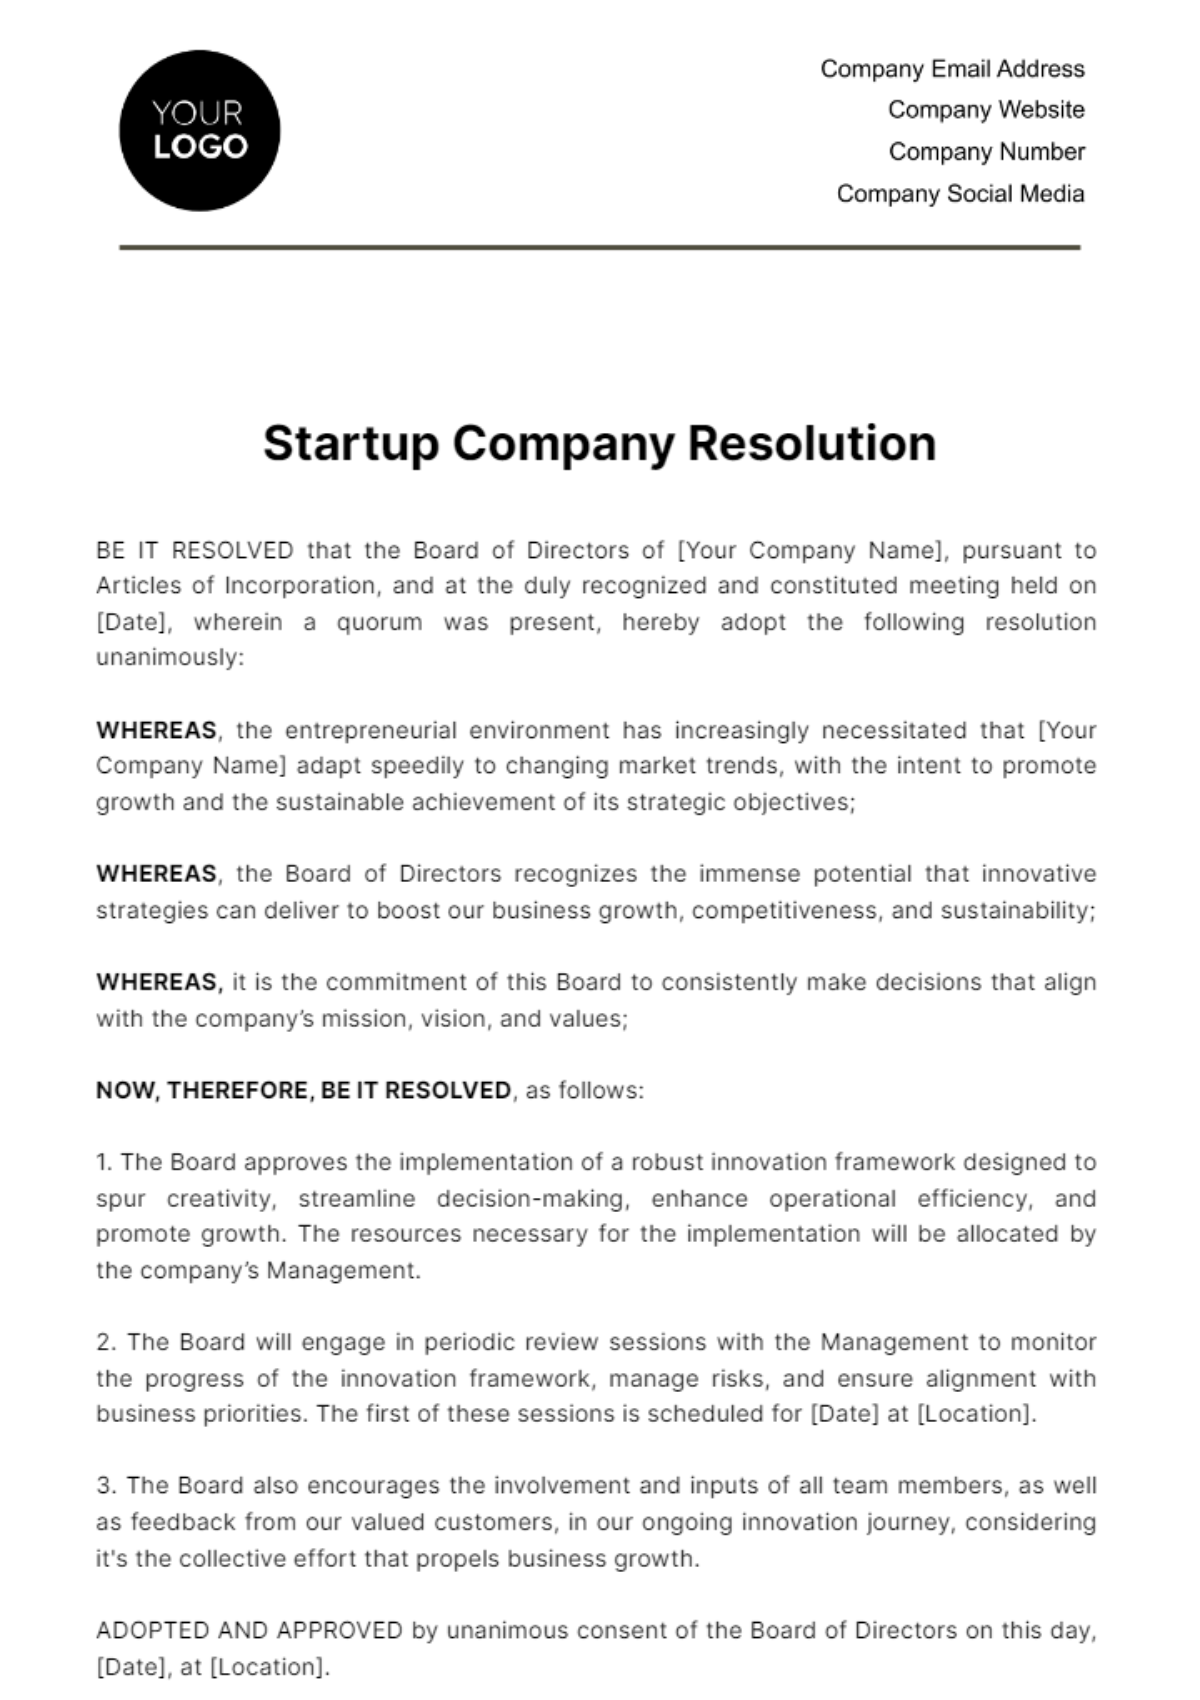 Startup Company Resolution Template